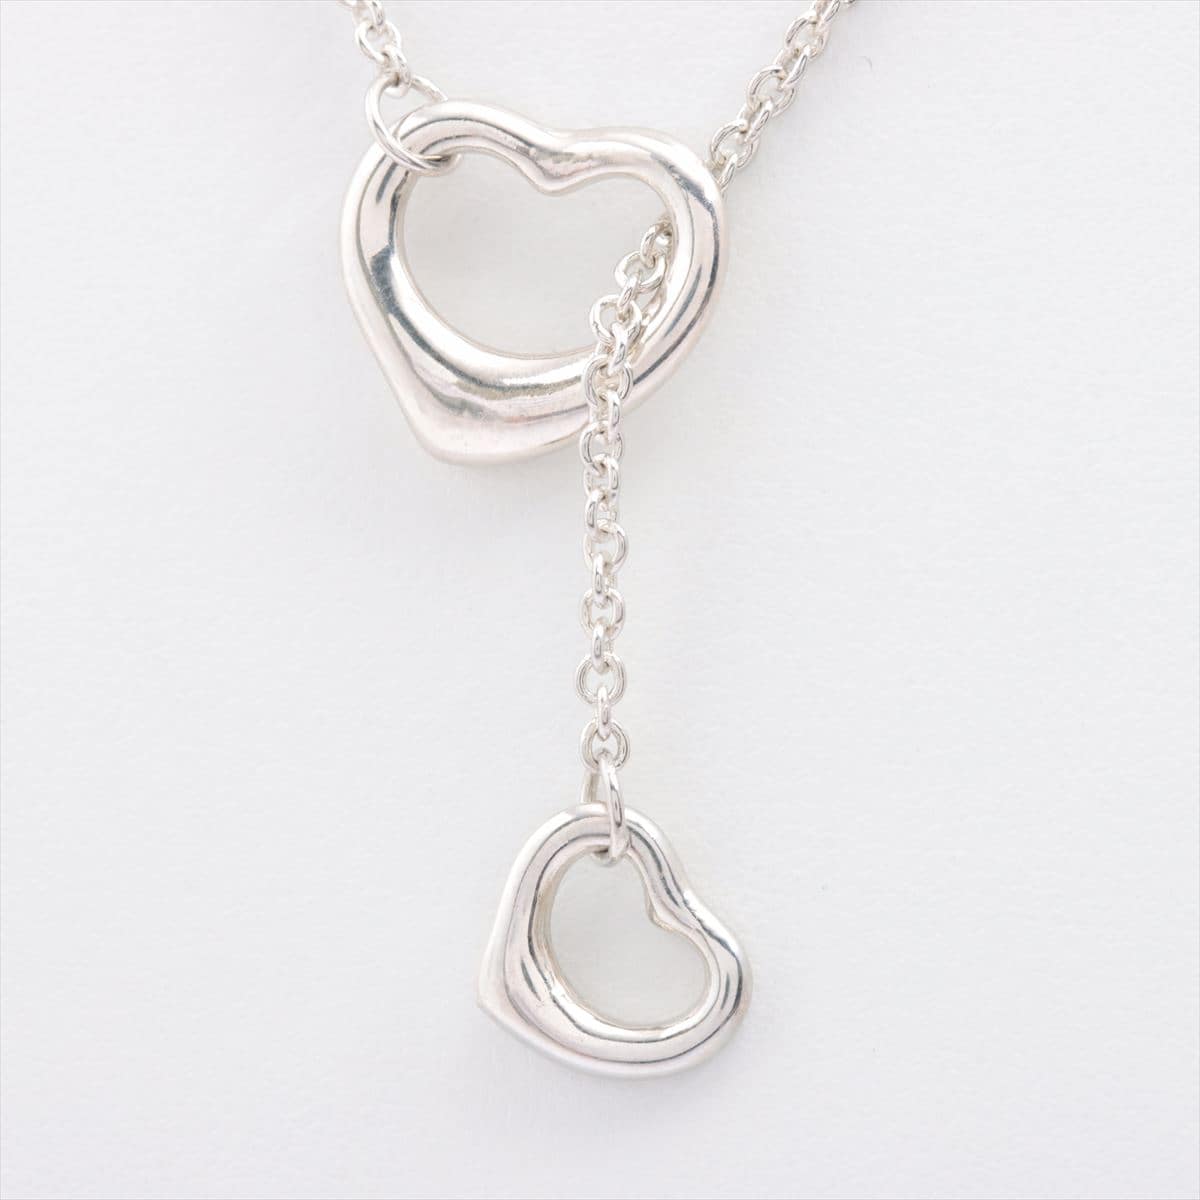 Tiffany Open Heart Necklace 925 6.6g Silver